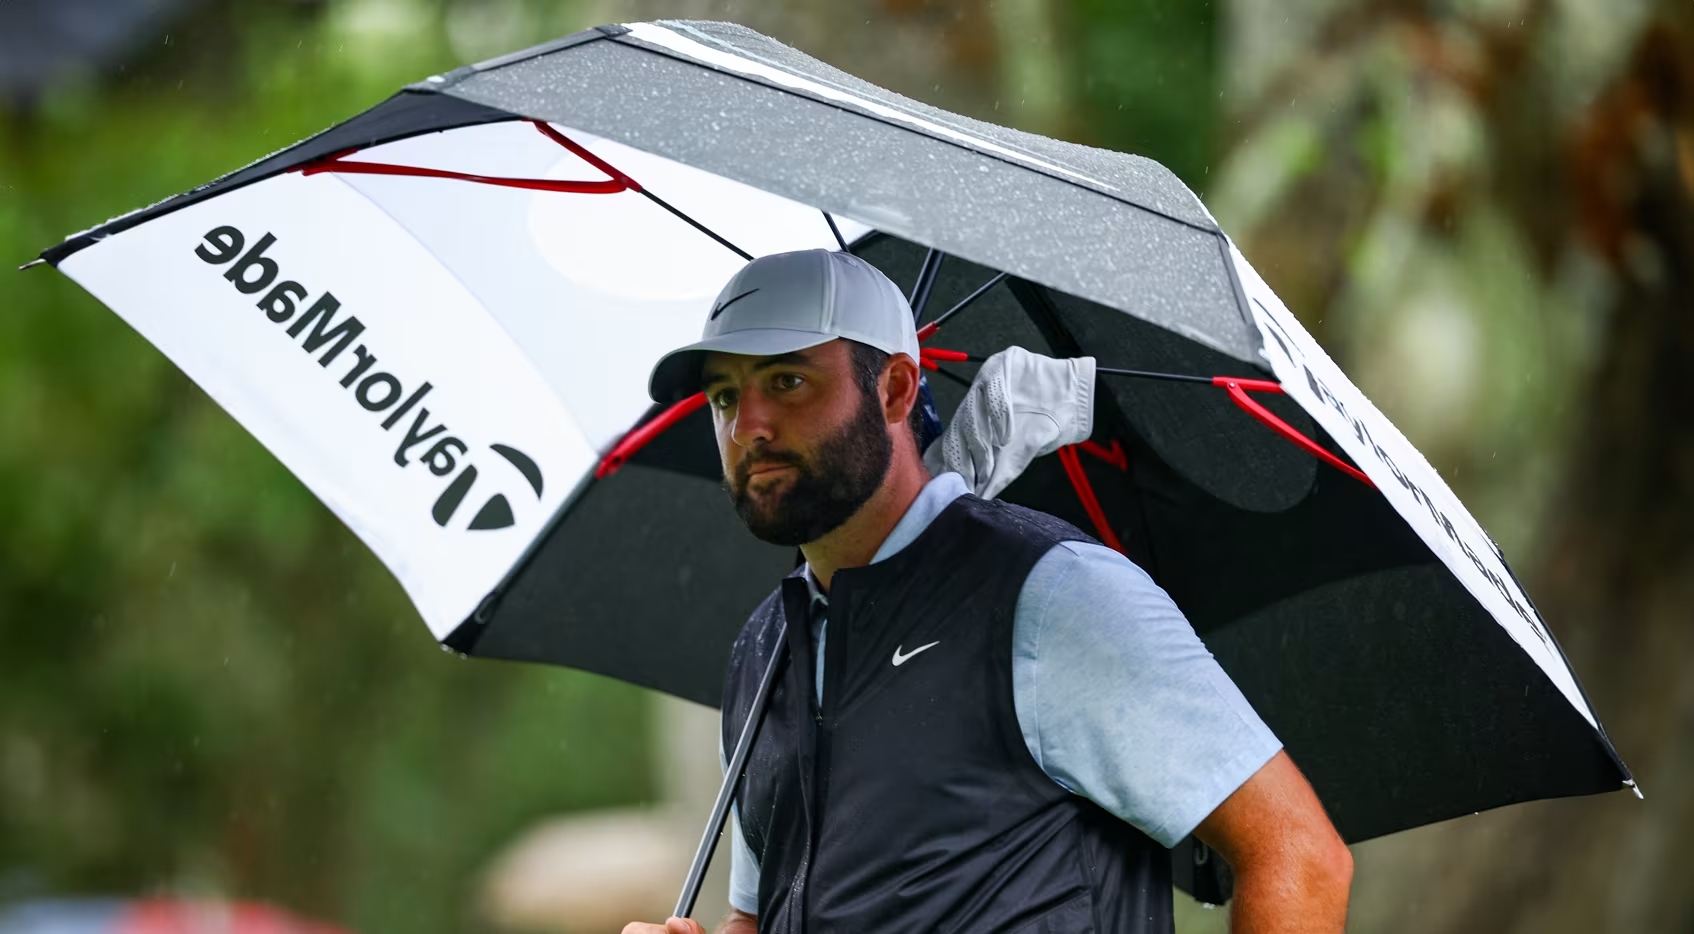 RBC Heritage Final suspended due to darkness